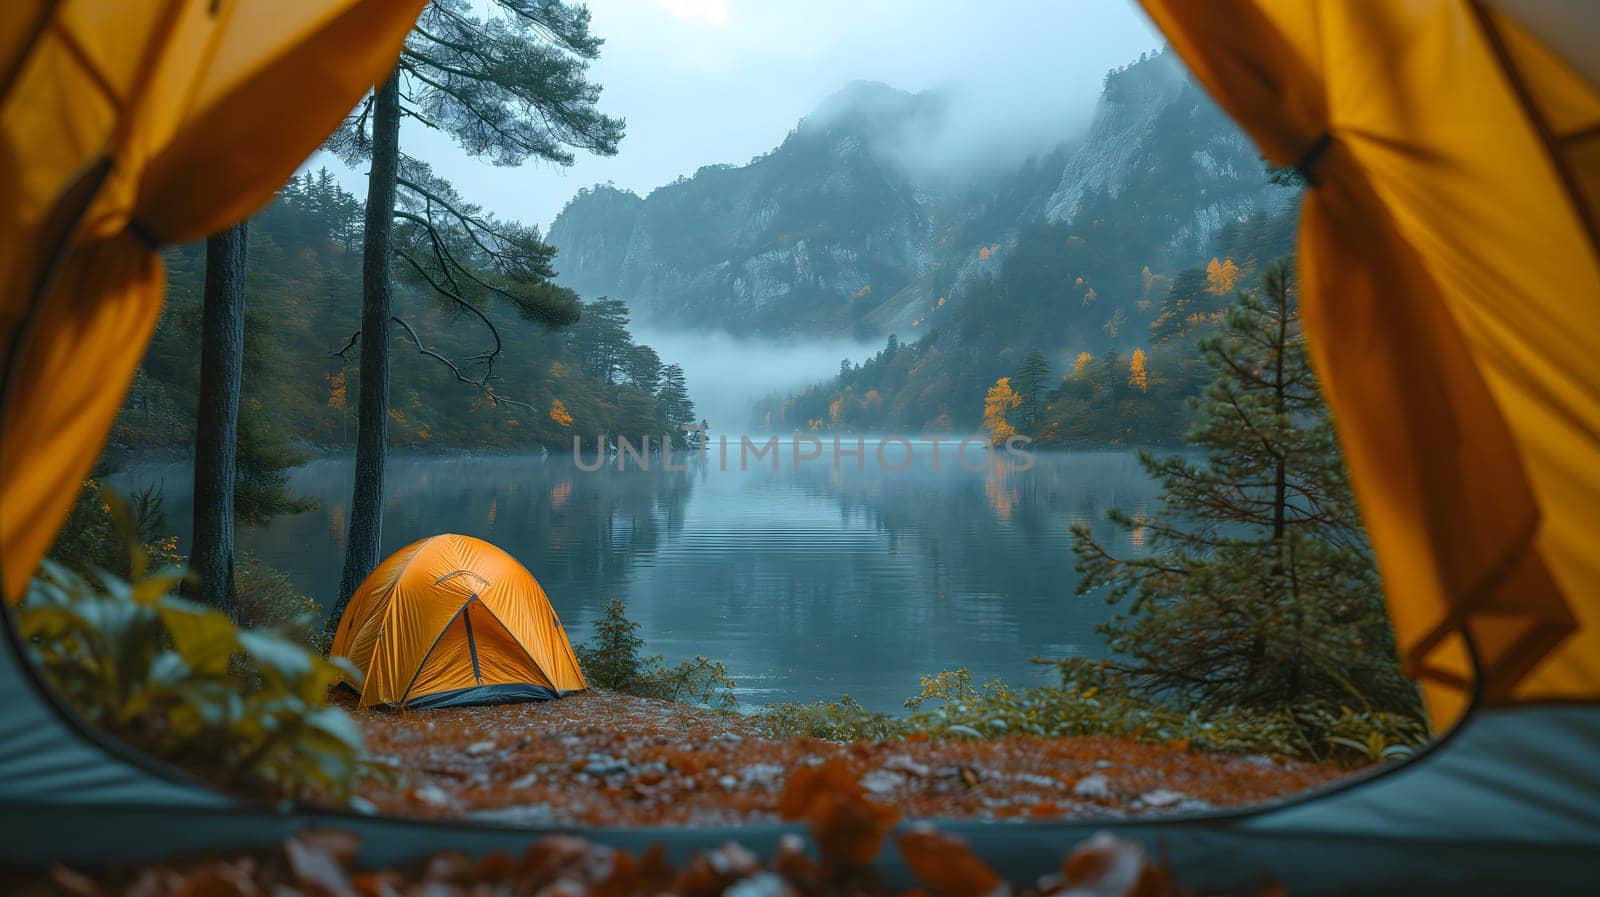 Close-up of a tent in the foreground and mountains with fog in the background with a lake or river in the foreground. Neural network generated image. Not based on any actual scene or pattern.